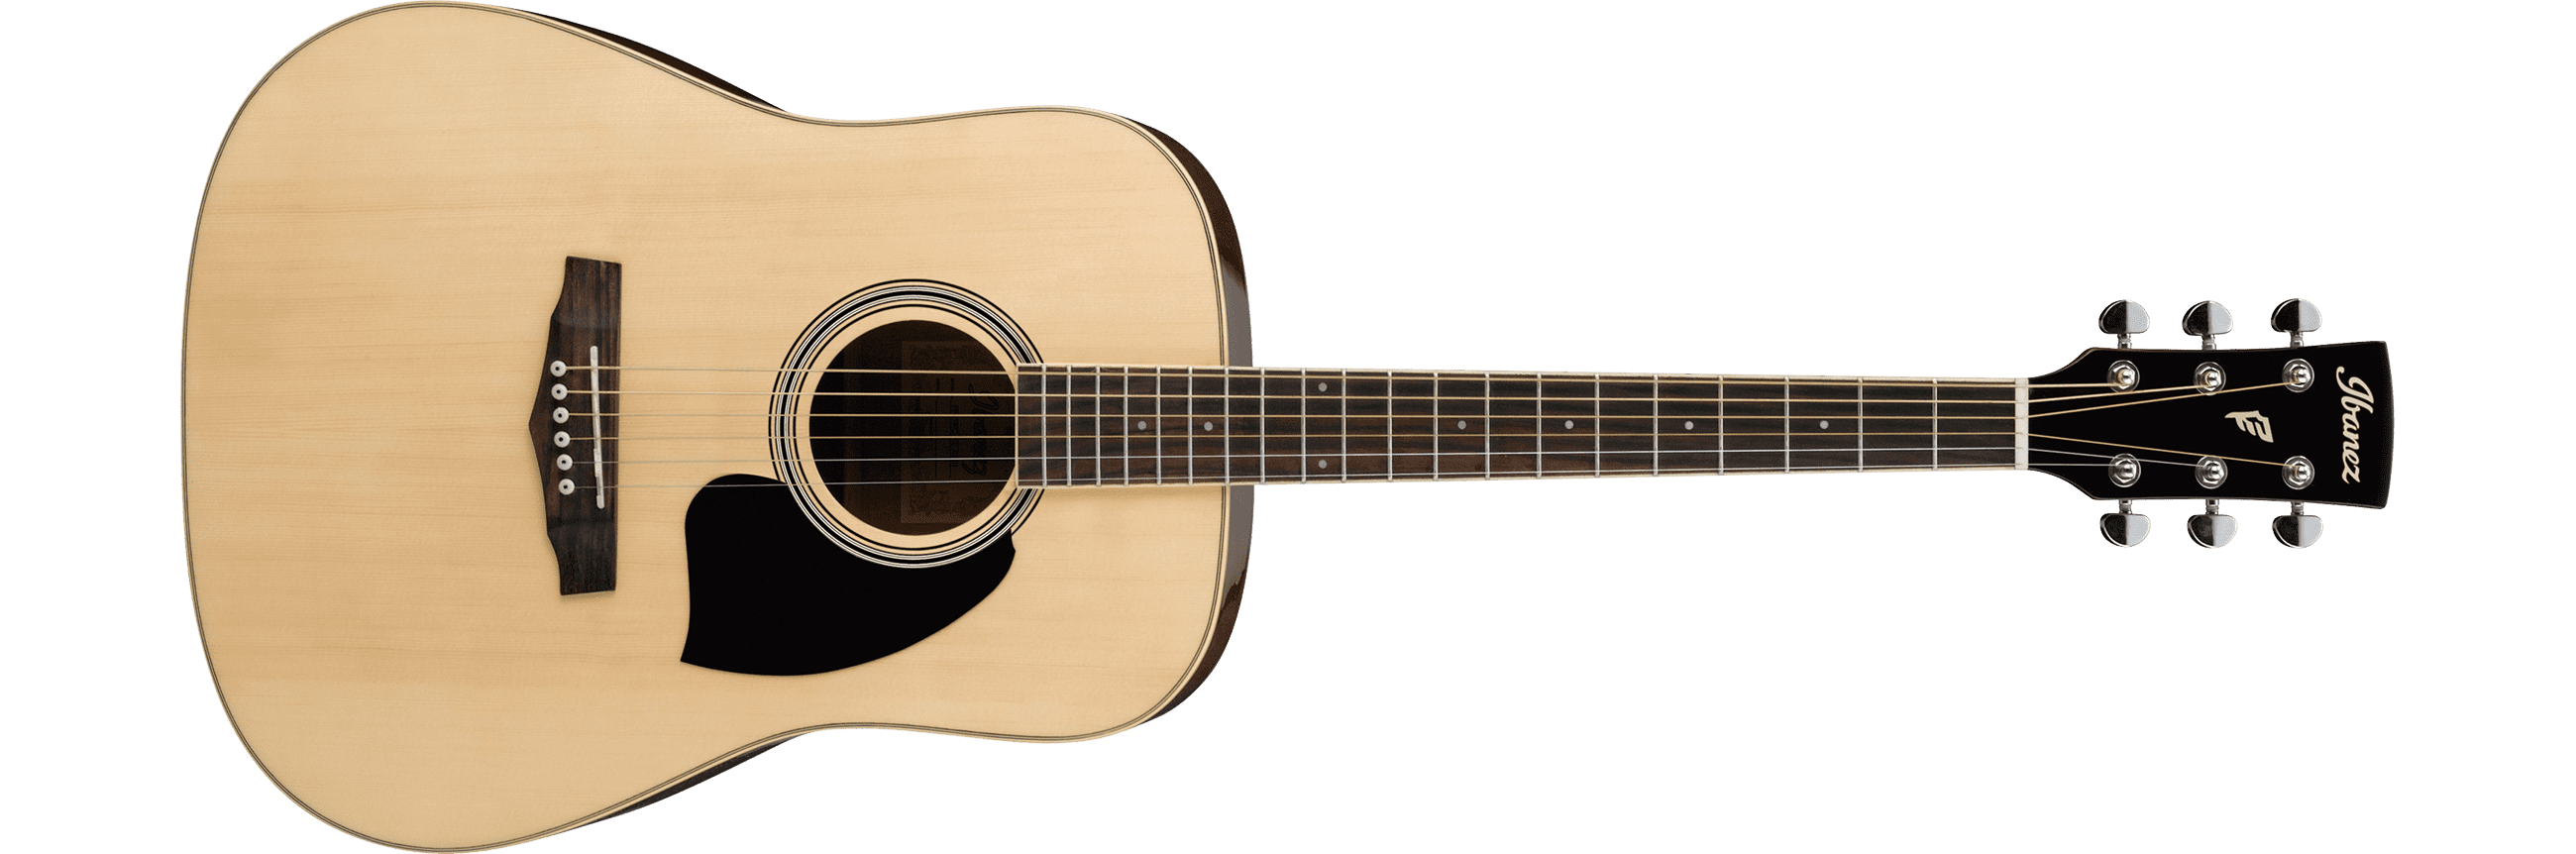 Ibanez PF15-NT Right-Handed Acoustic Guitar Natural Finish